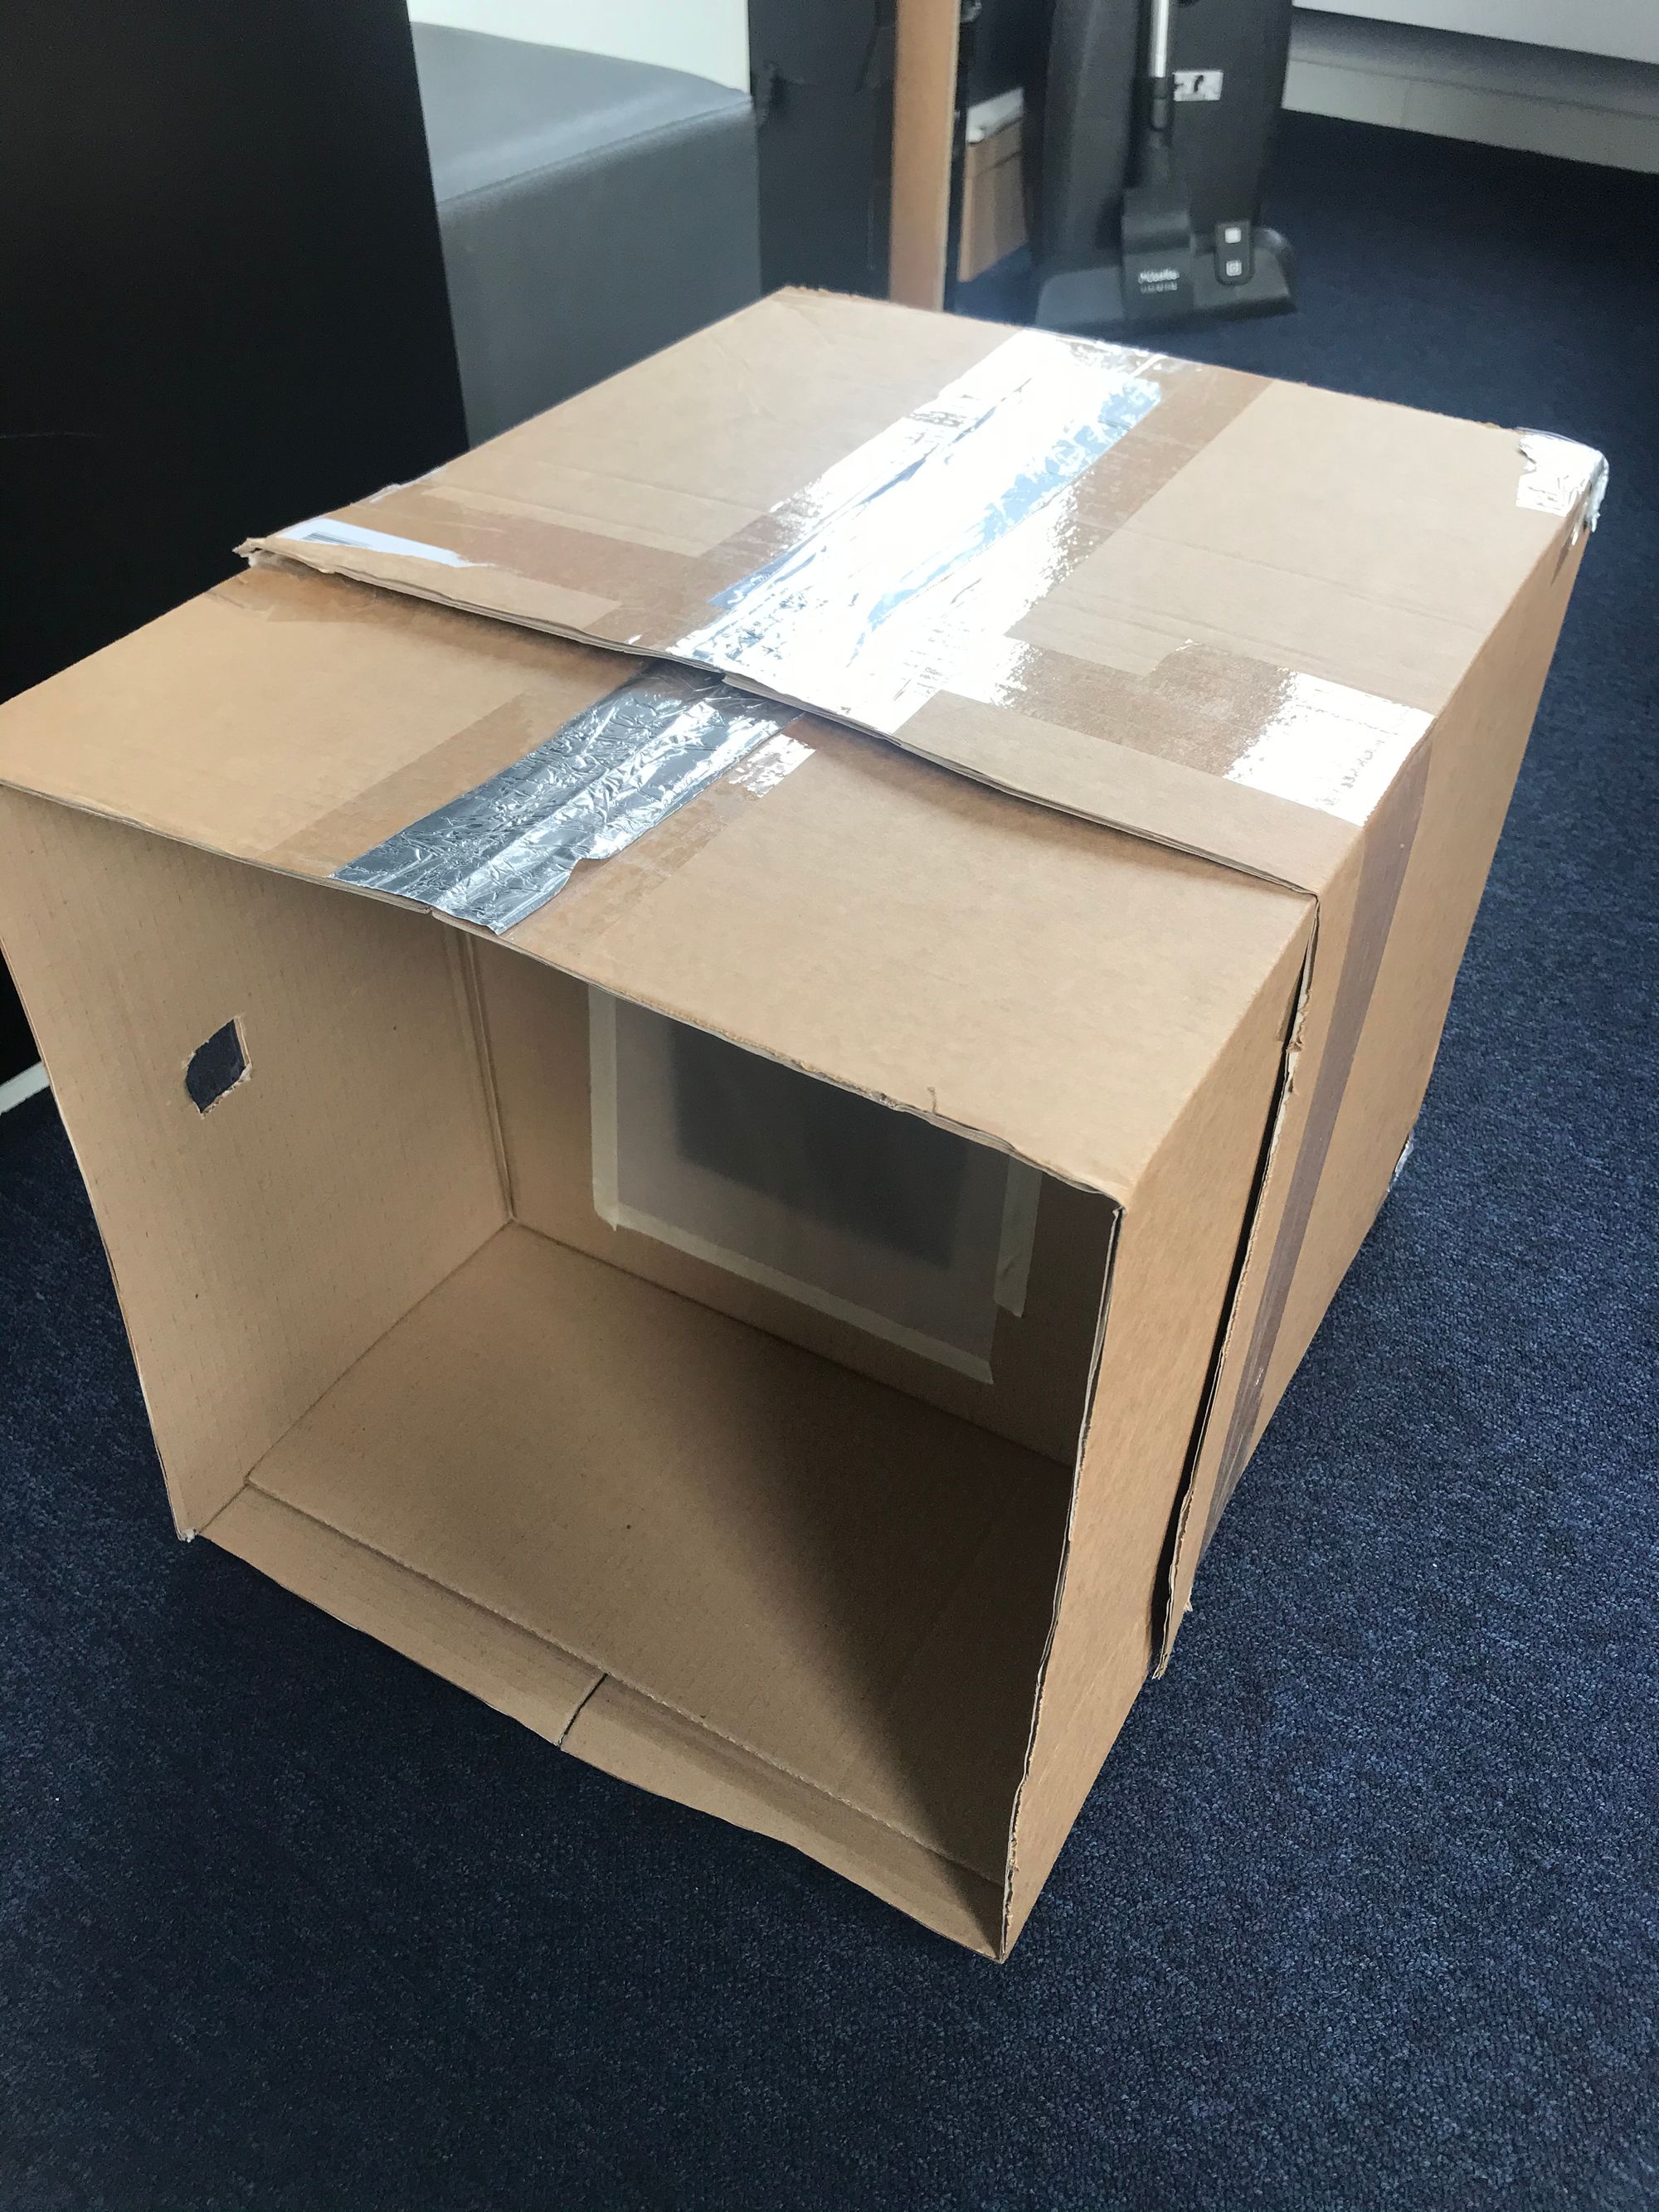 The first functioning portable camera obscura Ro made.